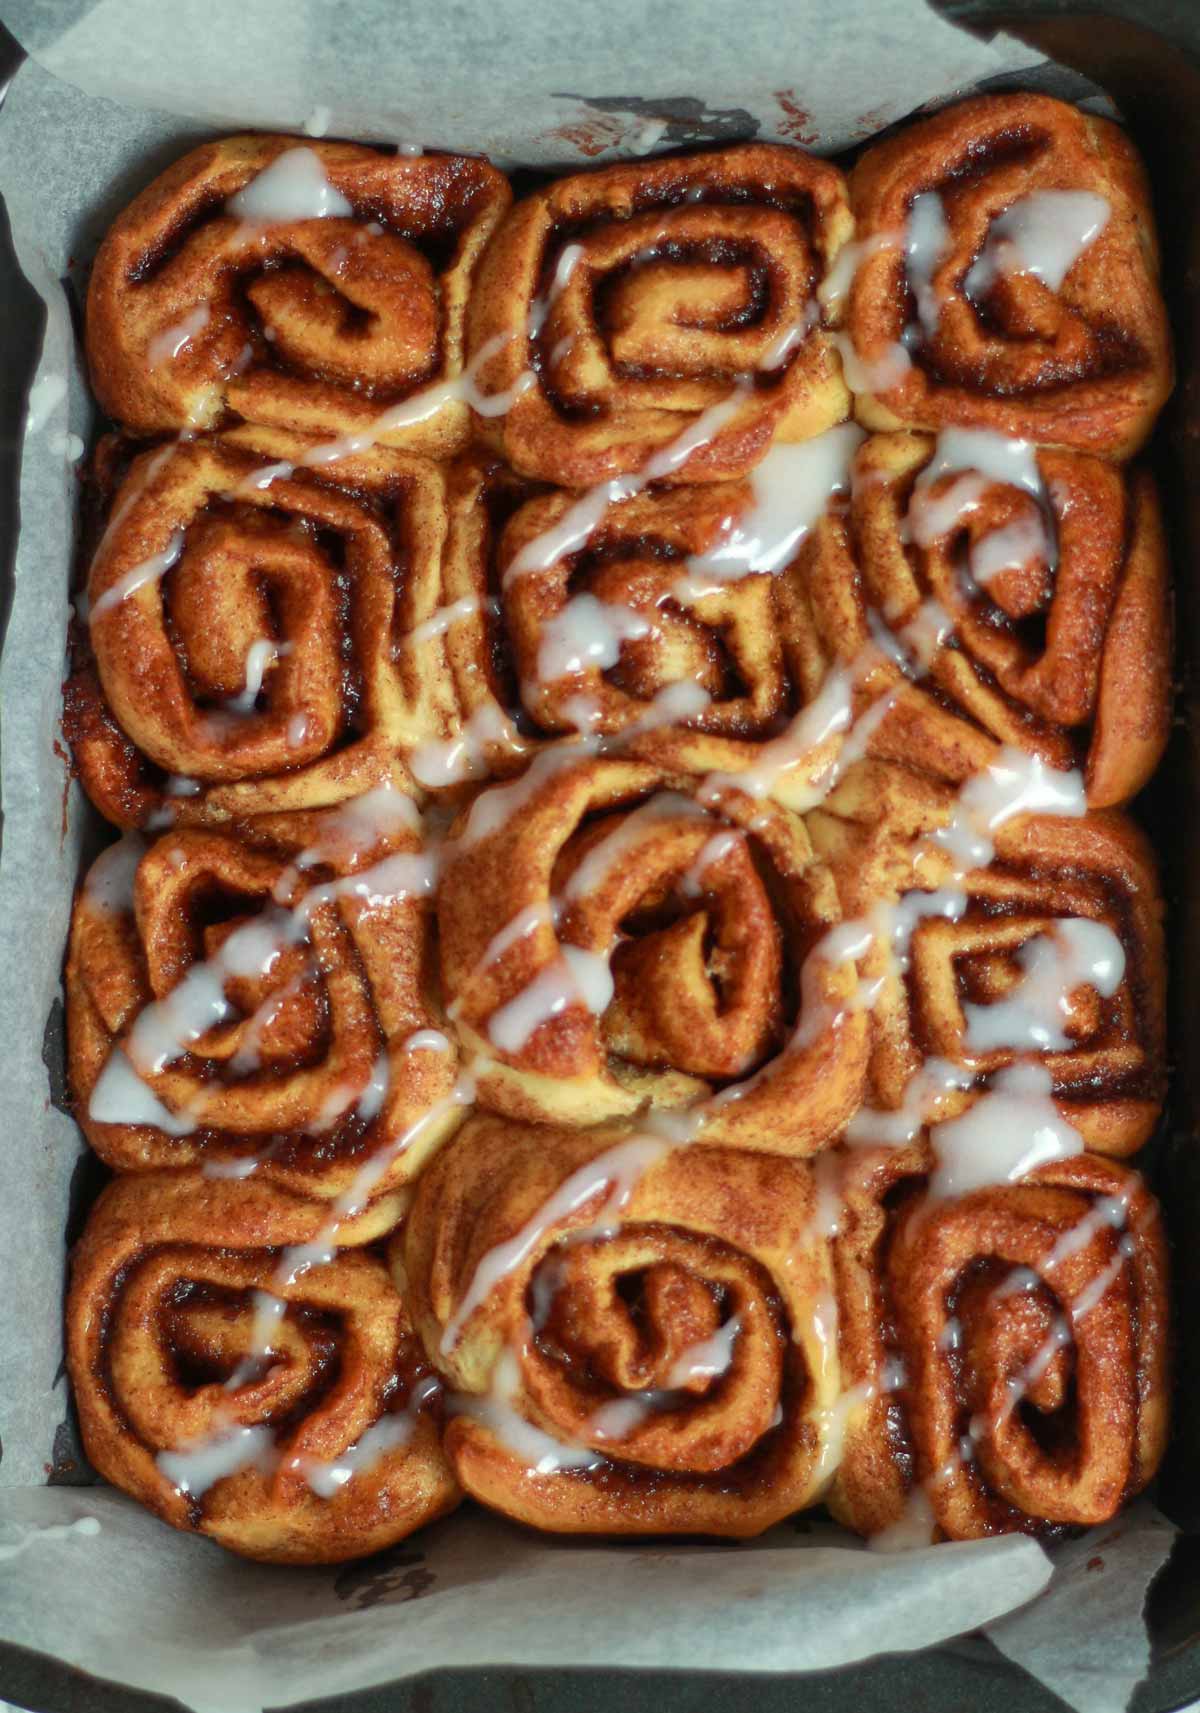 Cream Cheese Icing Drizzled On Top Of The Warm Cinnamon Rolls